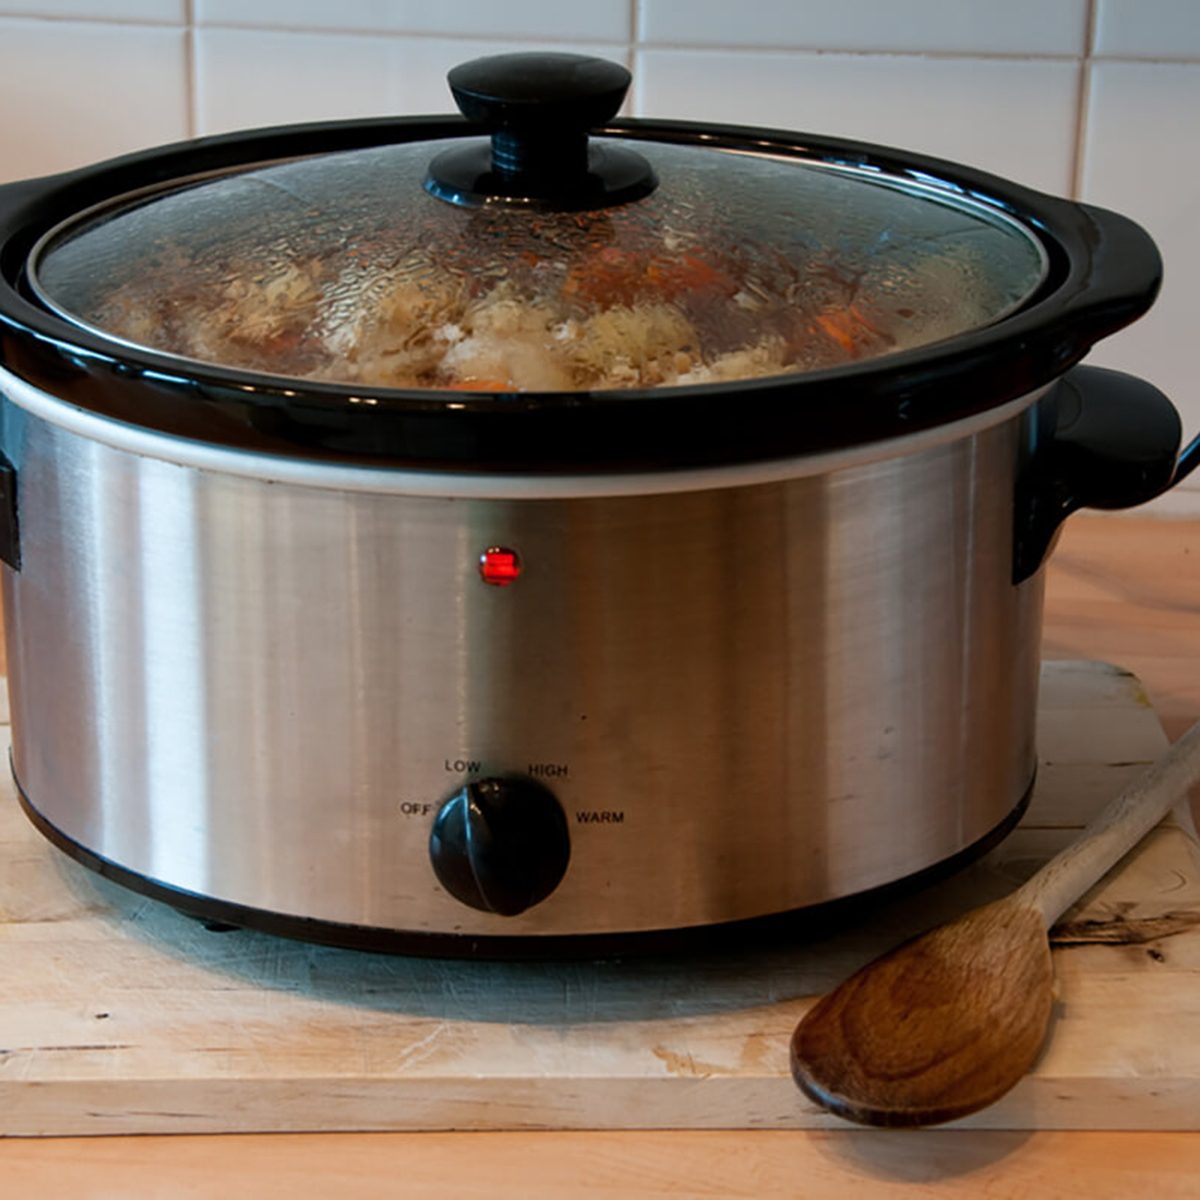 Can You Put a Crock-Pot in the Oven? (Safety Guide) - Prudent Reviews